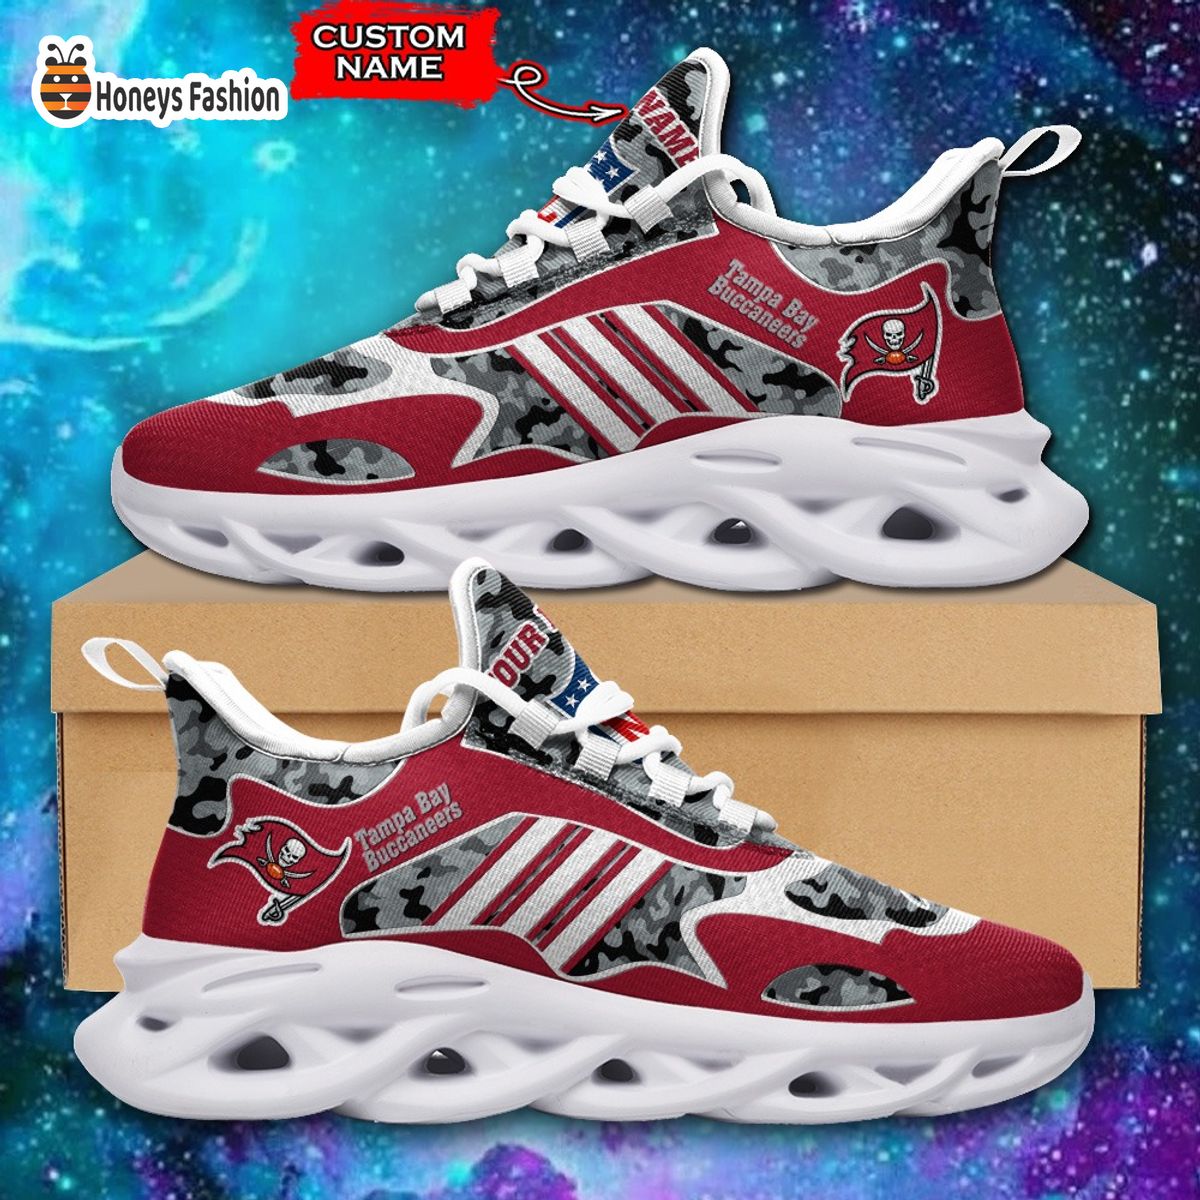 Tampa Bay Buccaneers NFL Adidas Personalized Max Soul Shoes